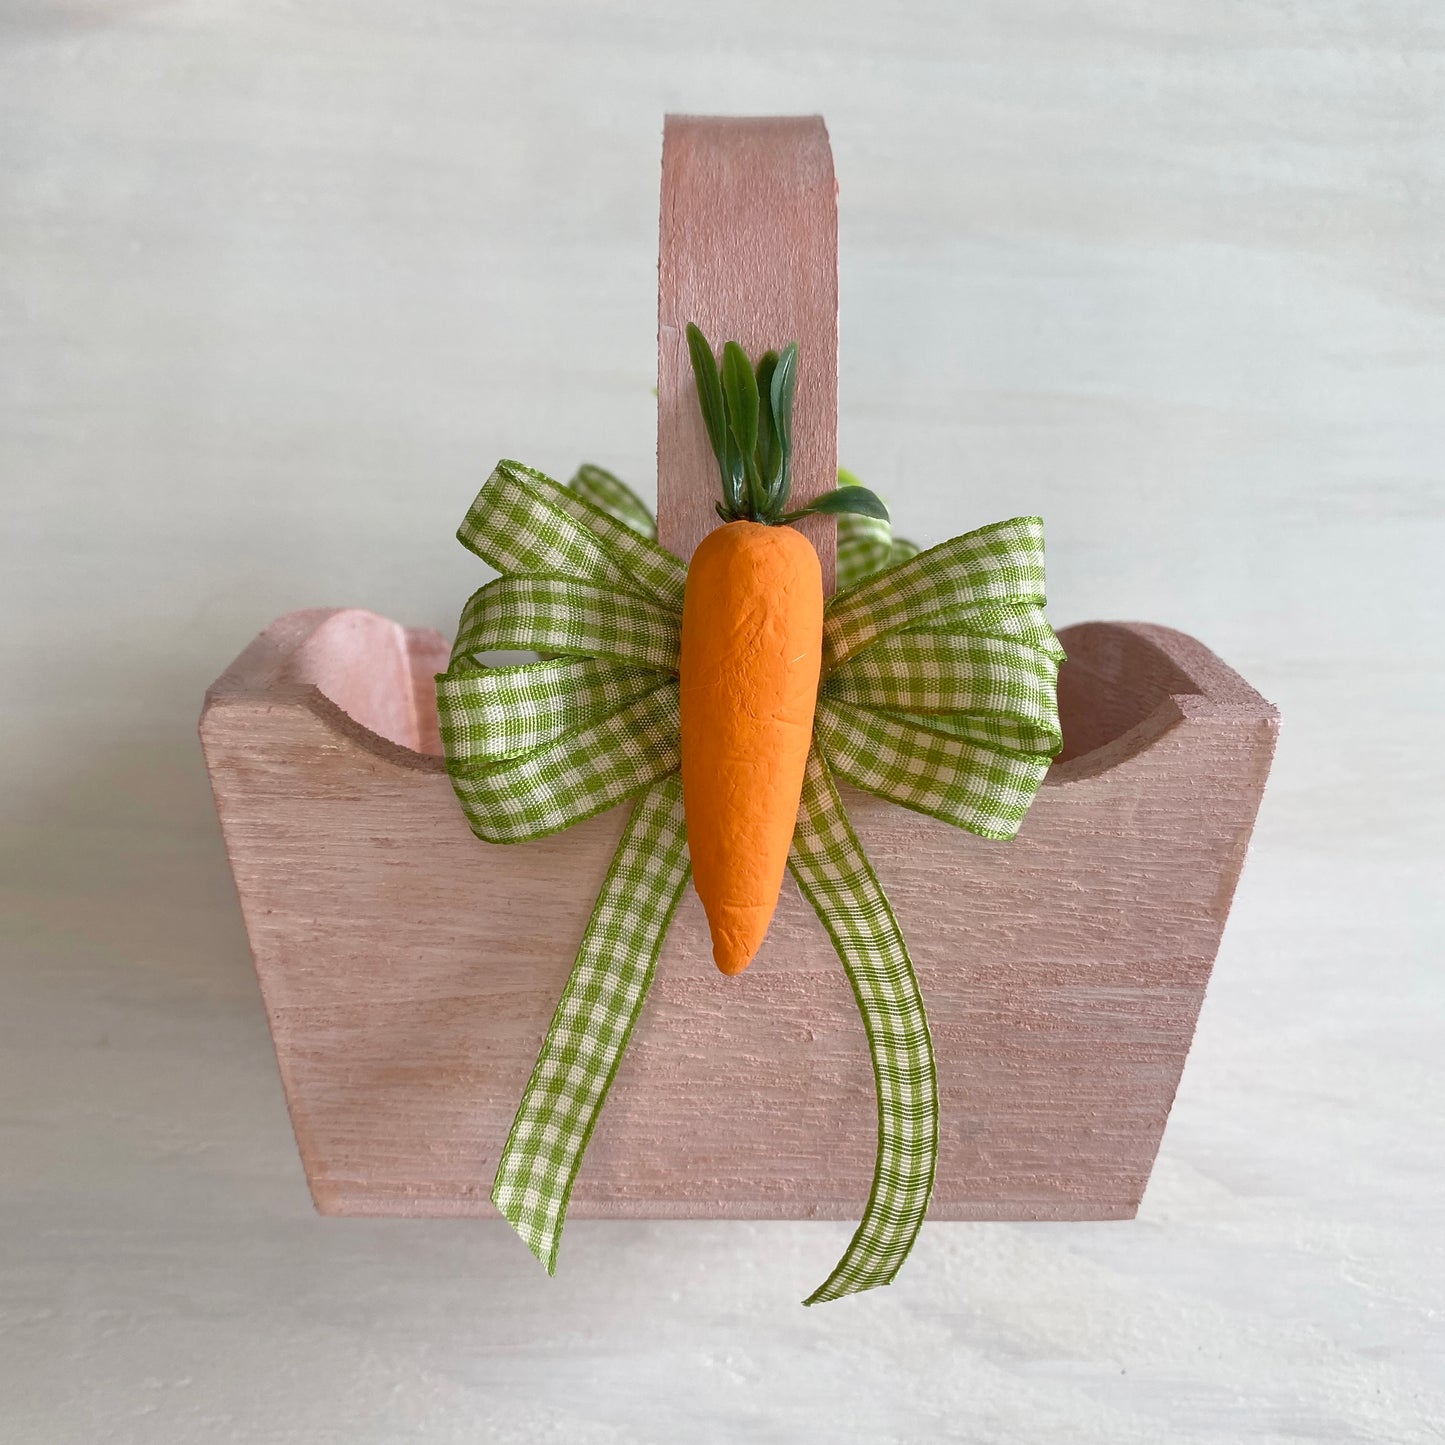 Easter Basket Mini, Cute Easter Wooden Basket with Carrot Decoration.